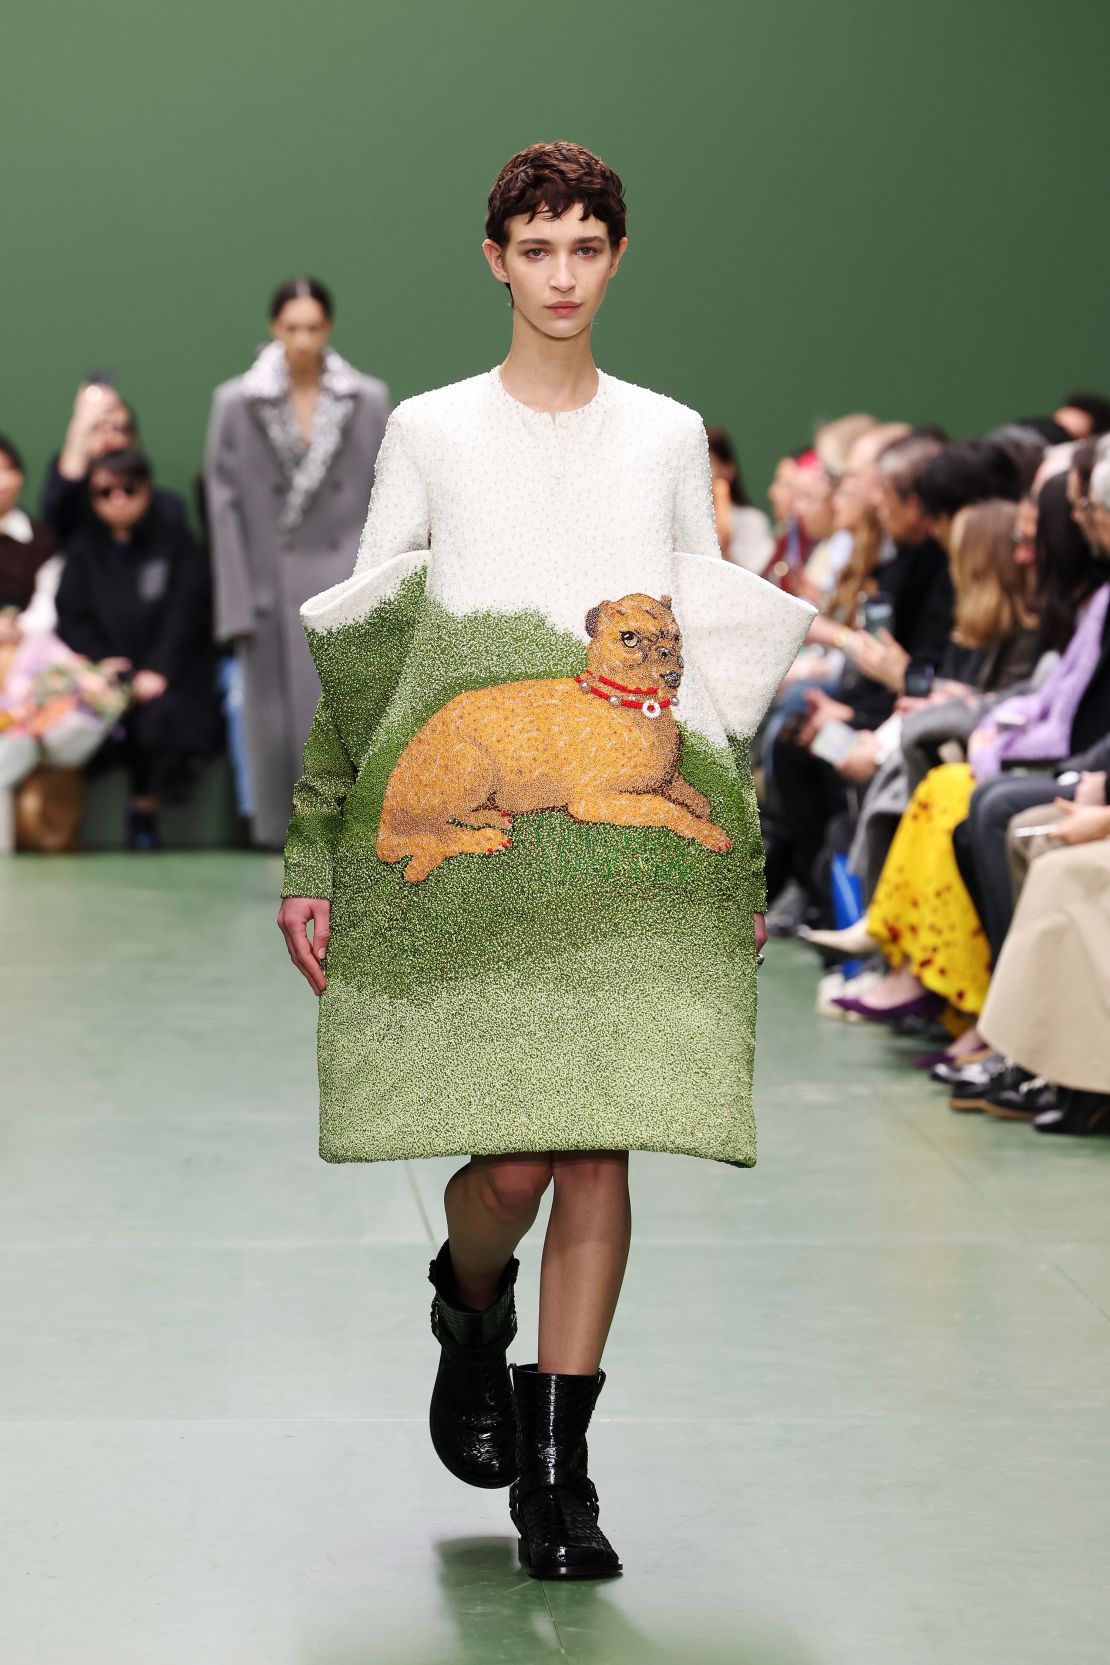 Prints and themes at the Loewe show were inspired by 20th-century American painter, Albert York.